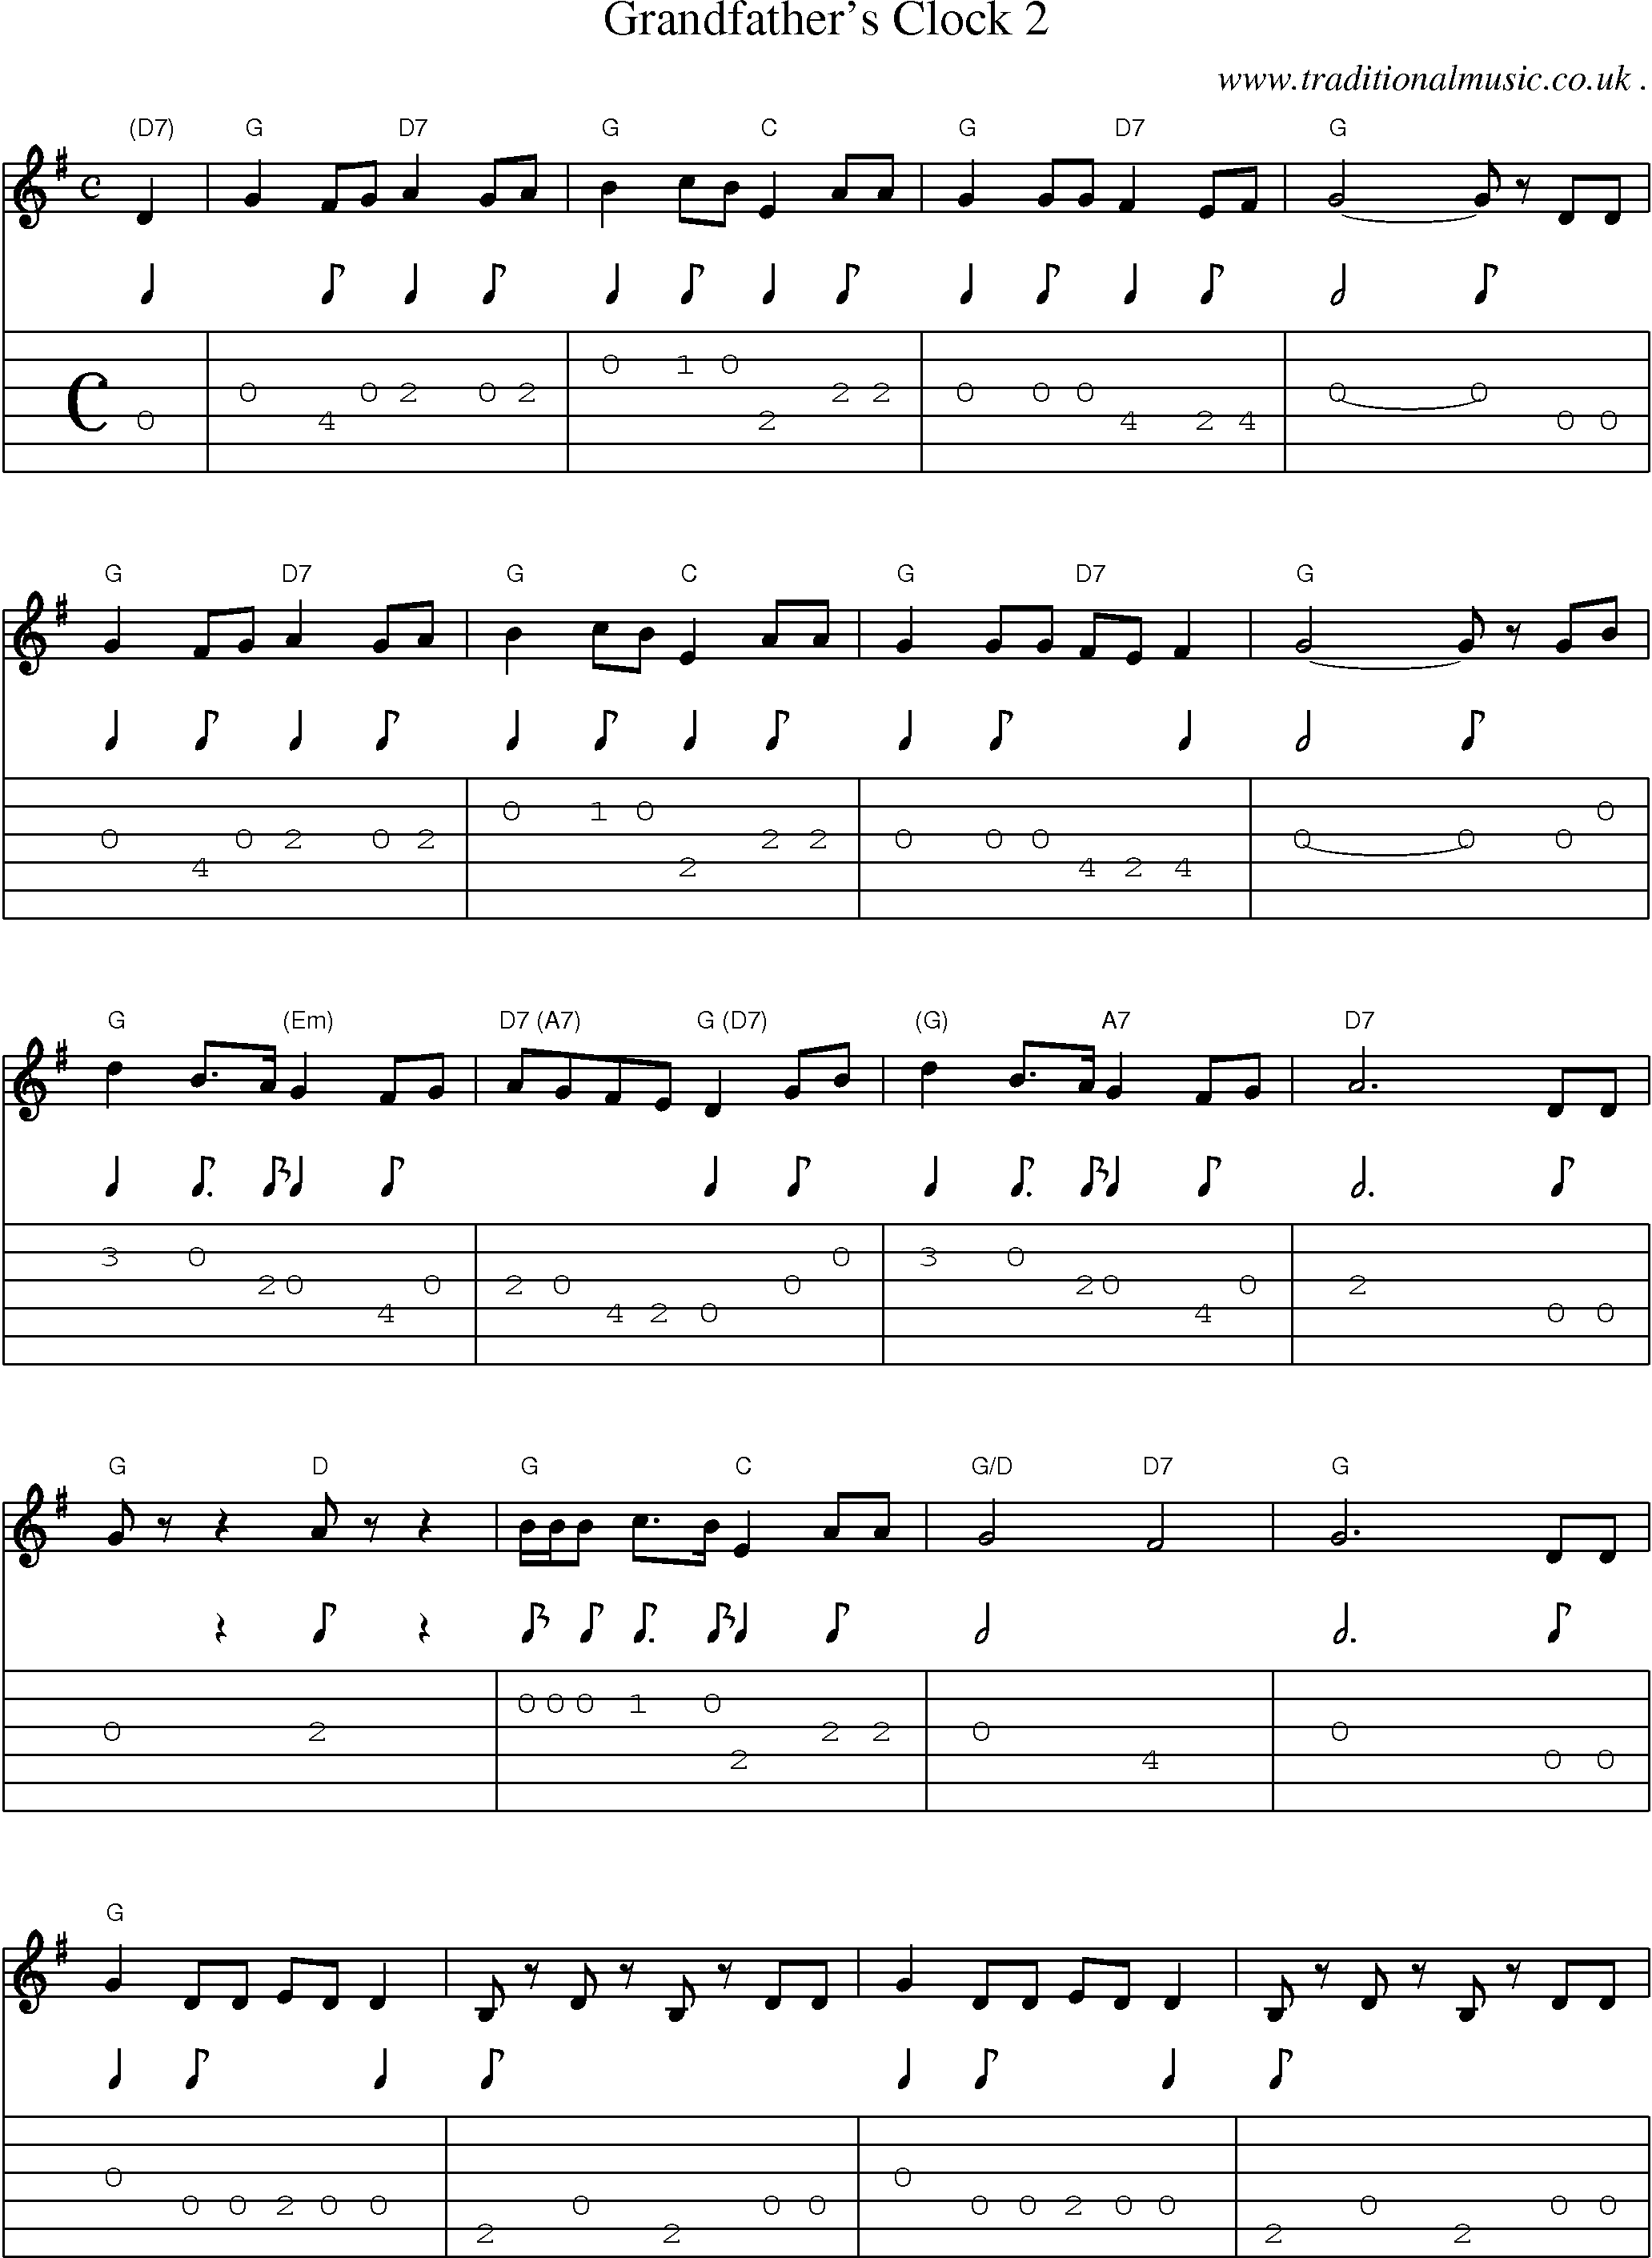 Music Score and Guitar Tabs for Grandfathers Clock 2